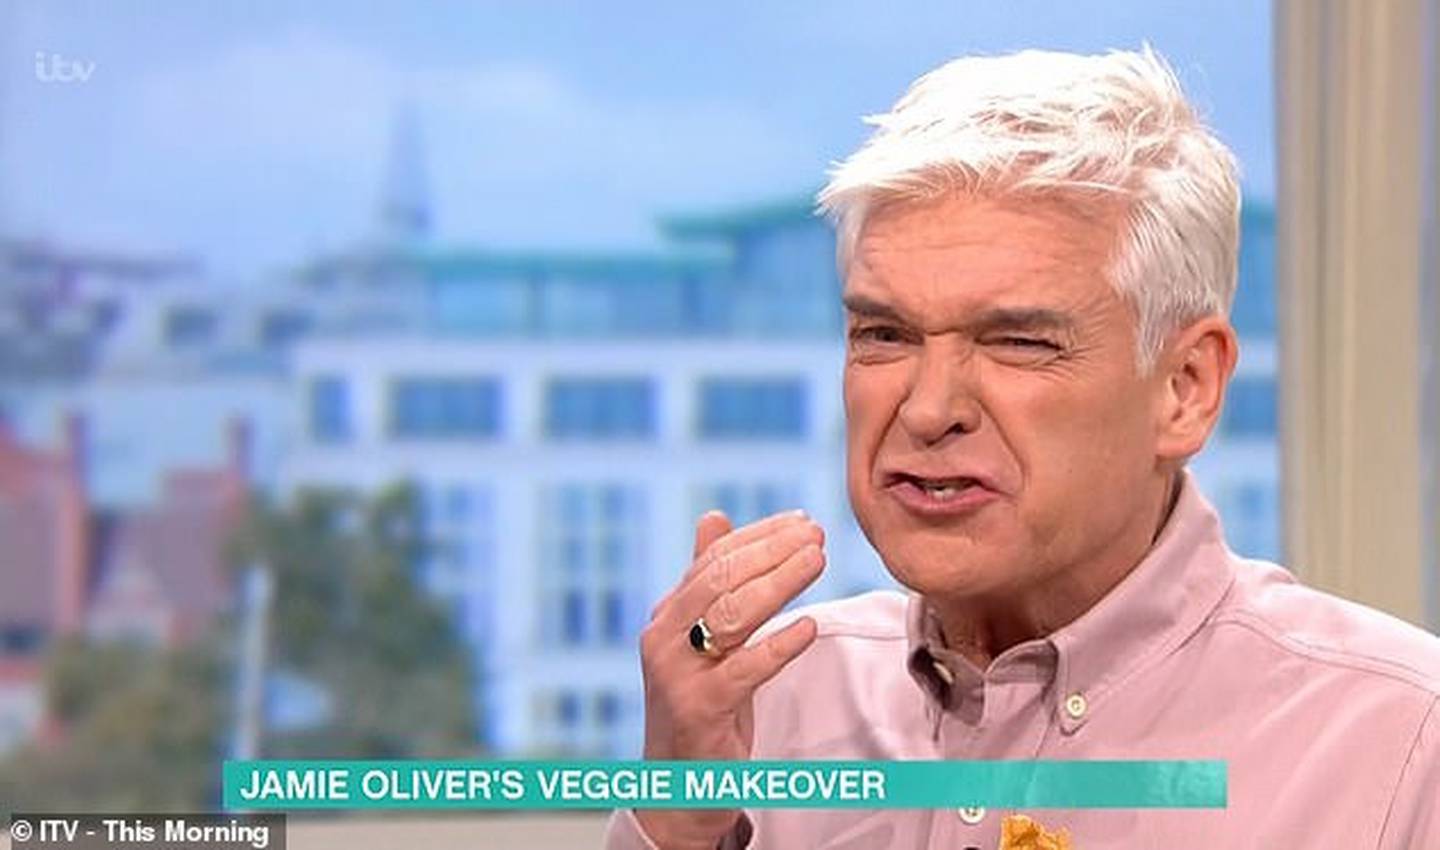 Jamie Oliver branded a filthy pervert on breakfast show pic